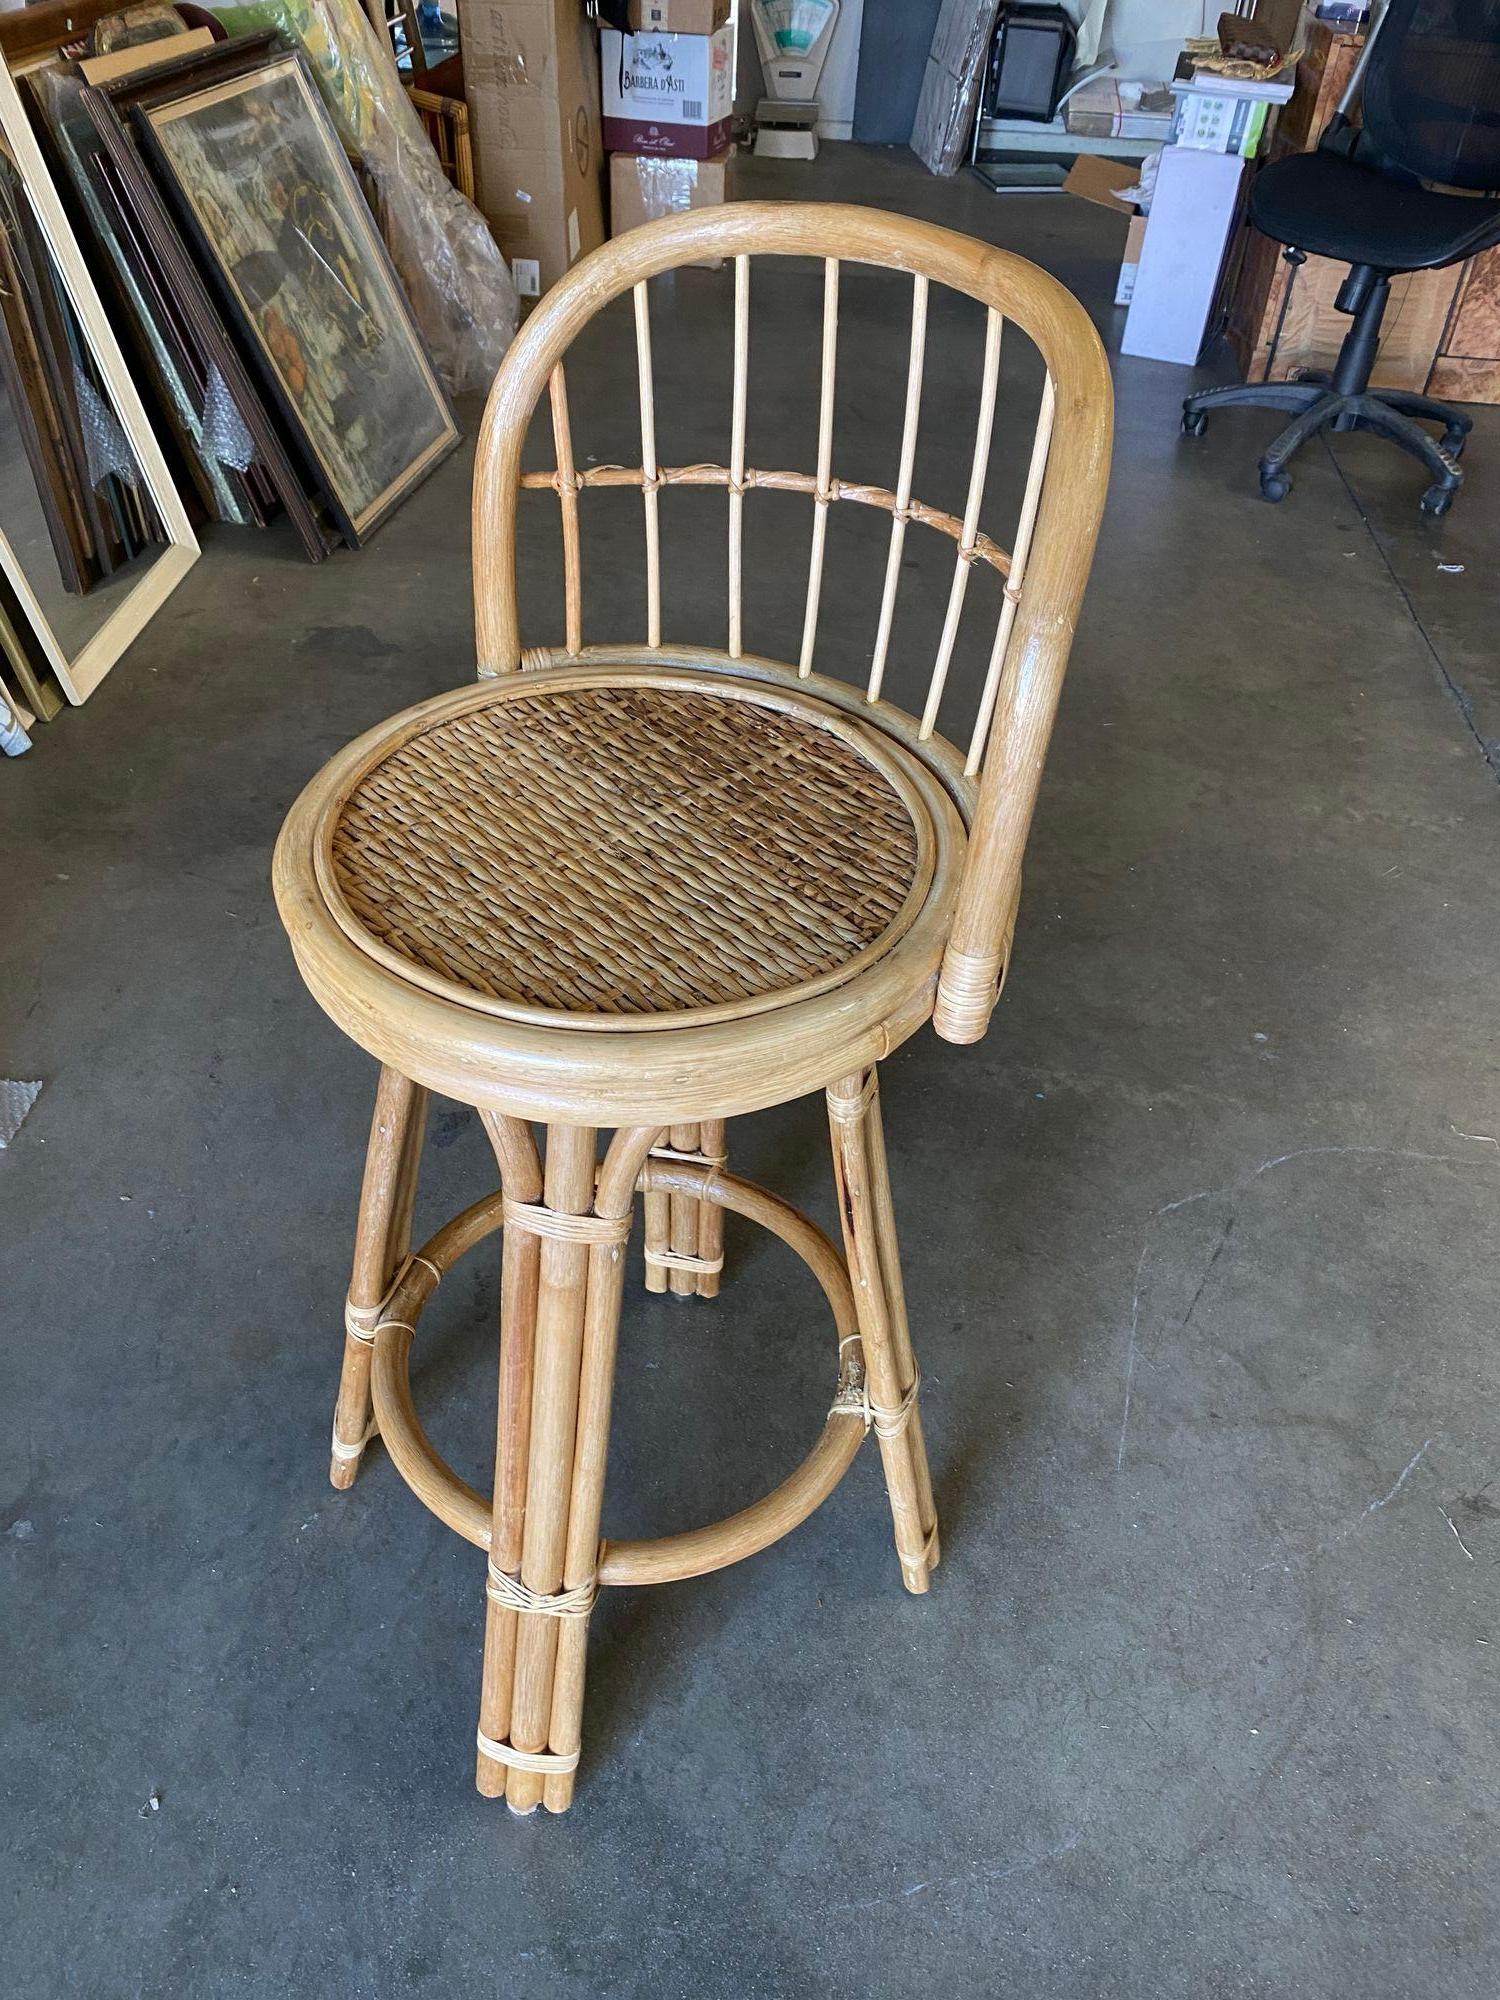 Rattan bar stool with woven wicker seats and 3-strand rattan pull legs. The stool comes with a fully formed backrest complimented by arches connecting each leg.  

Measures: Height- 38